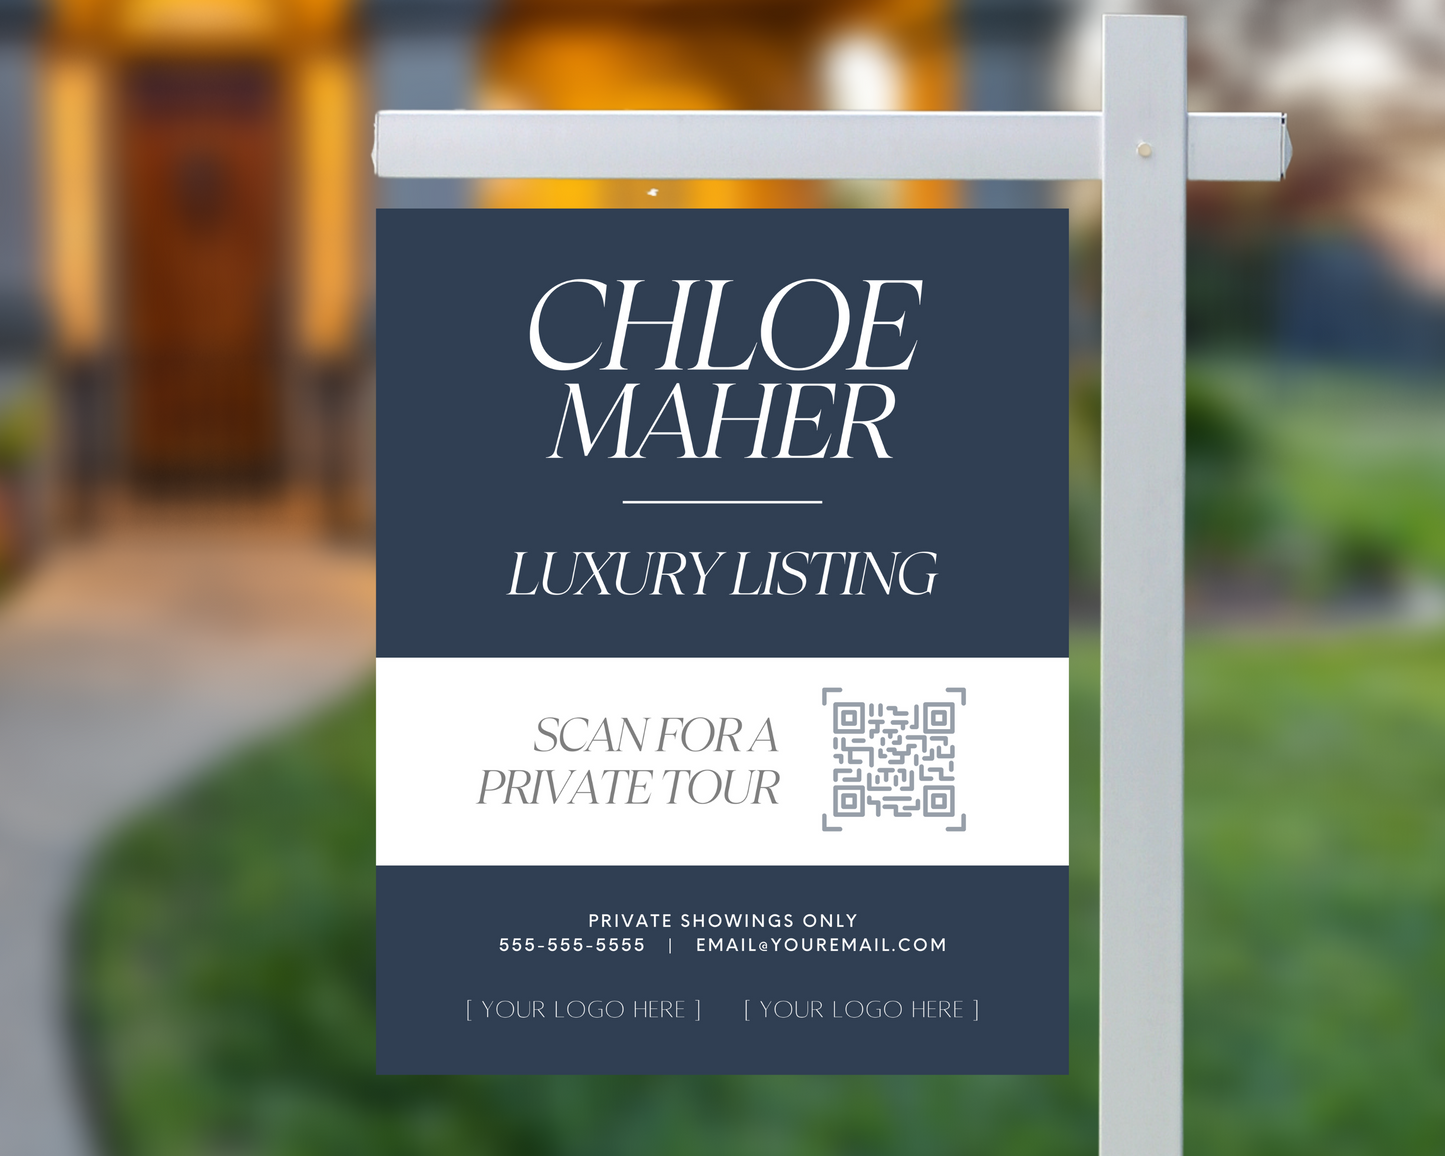 Your clients will be sure to remember you every time they see your professional real estate yard sign. So, what are you waiting for? Start customizing your realtor yard sign template today and watch your business grow!